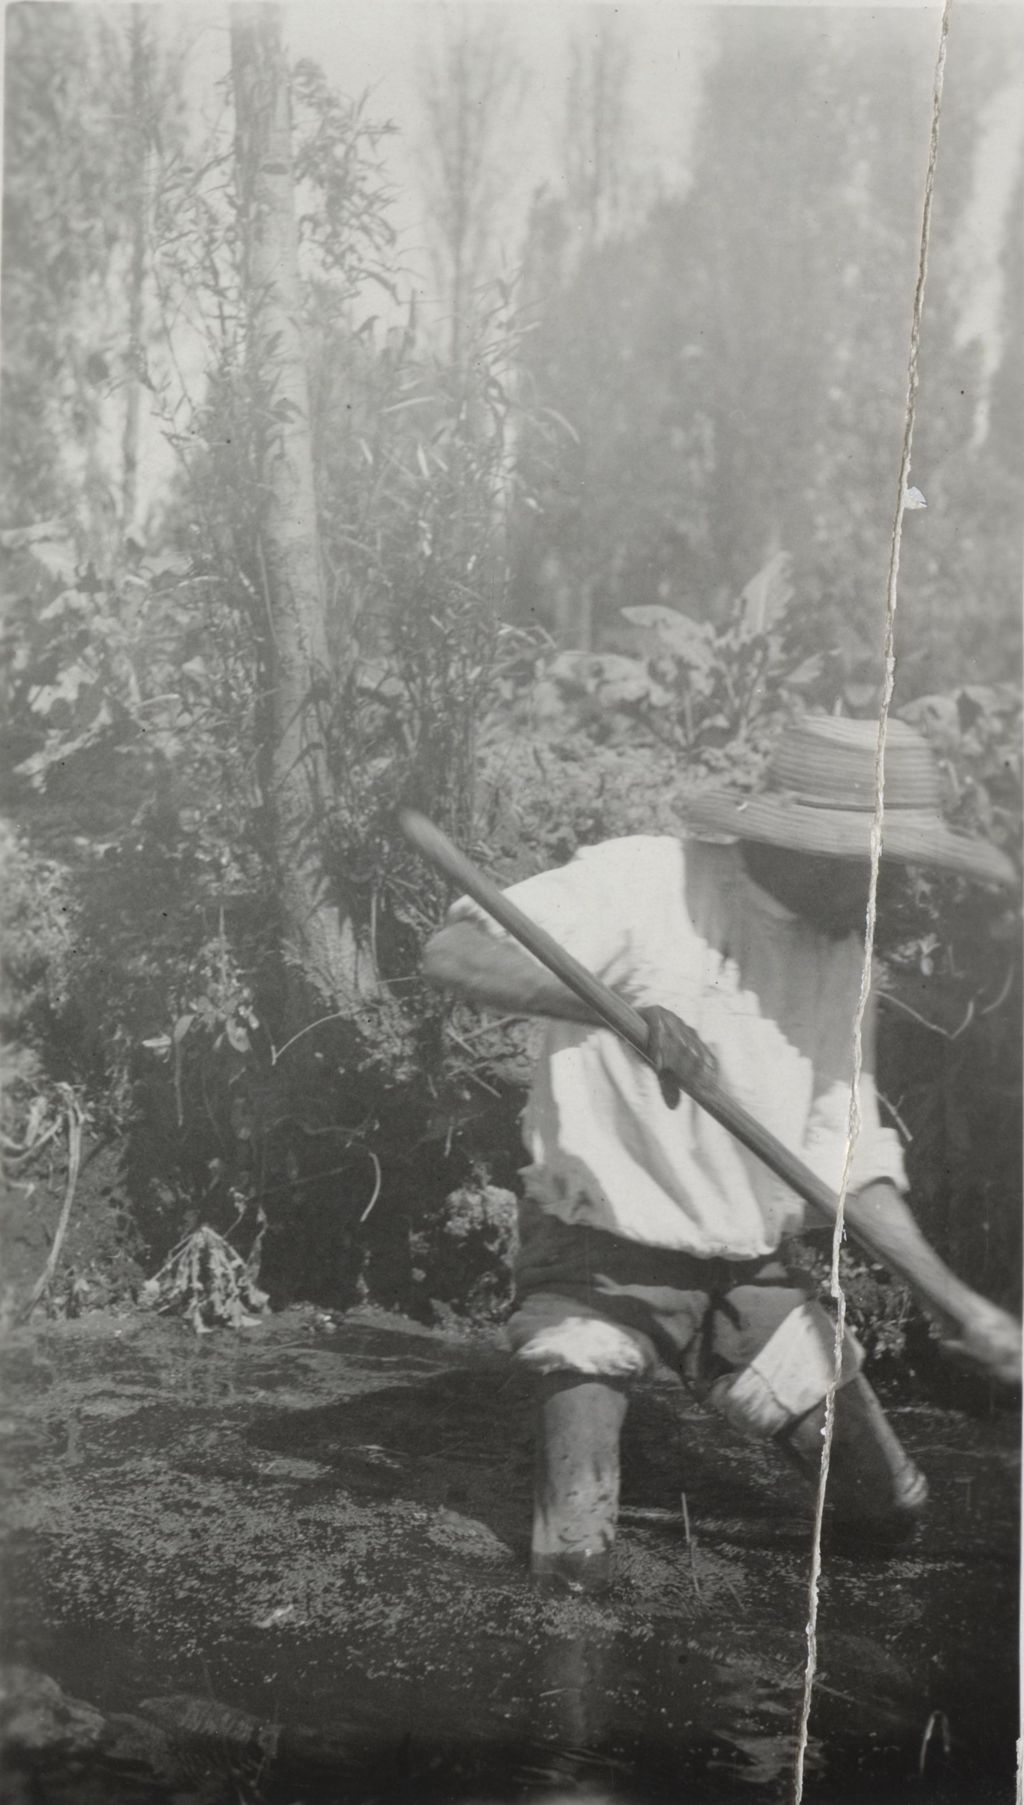 Man working in swampy water photographed on Jane Addams' trip to Mexico